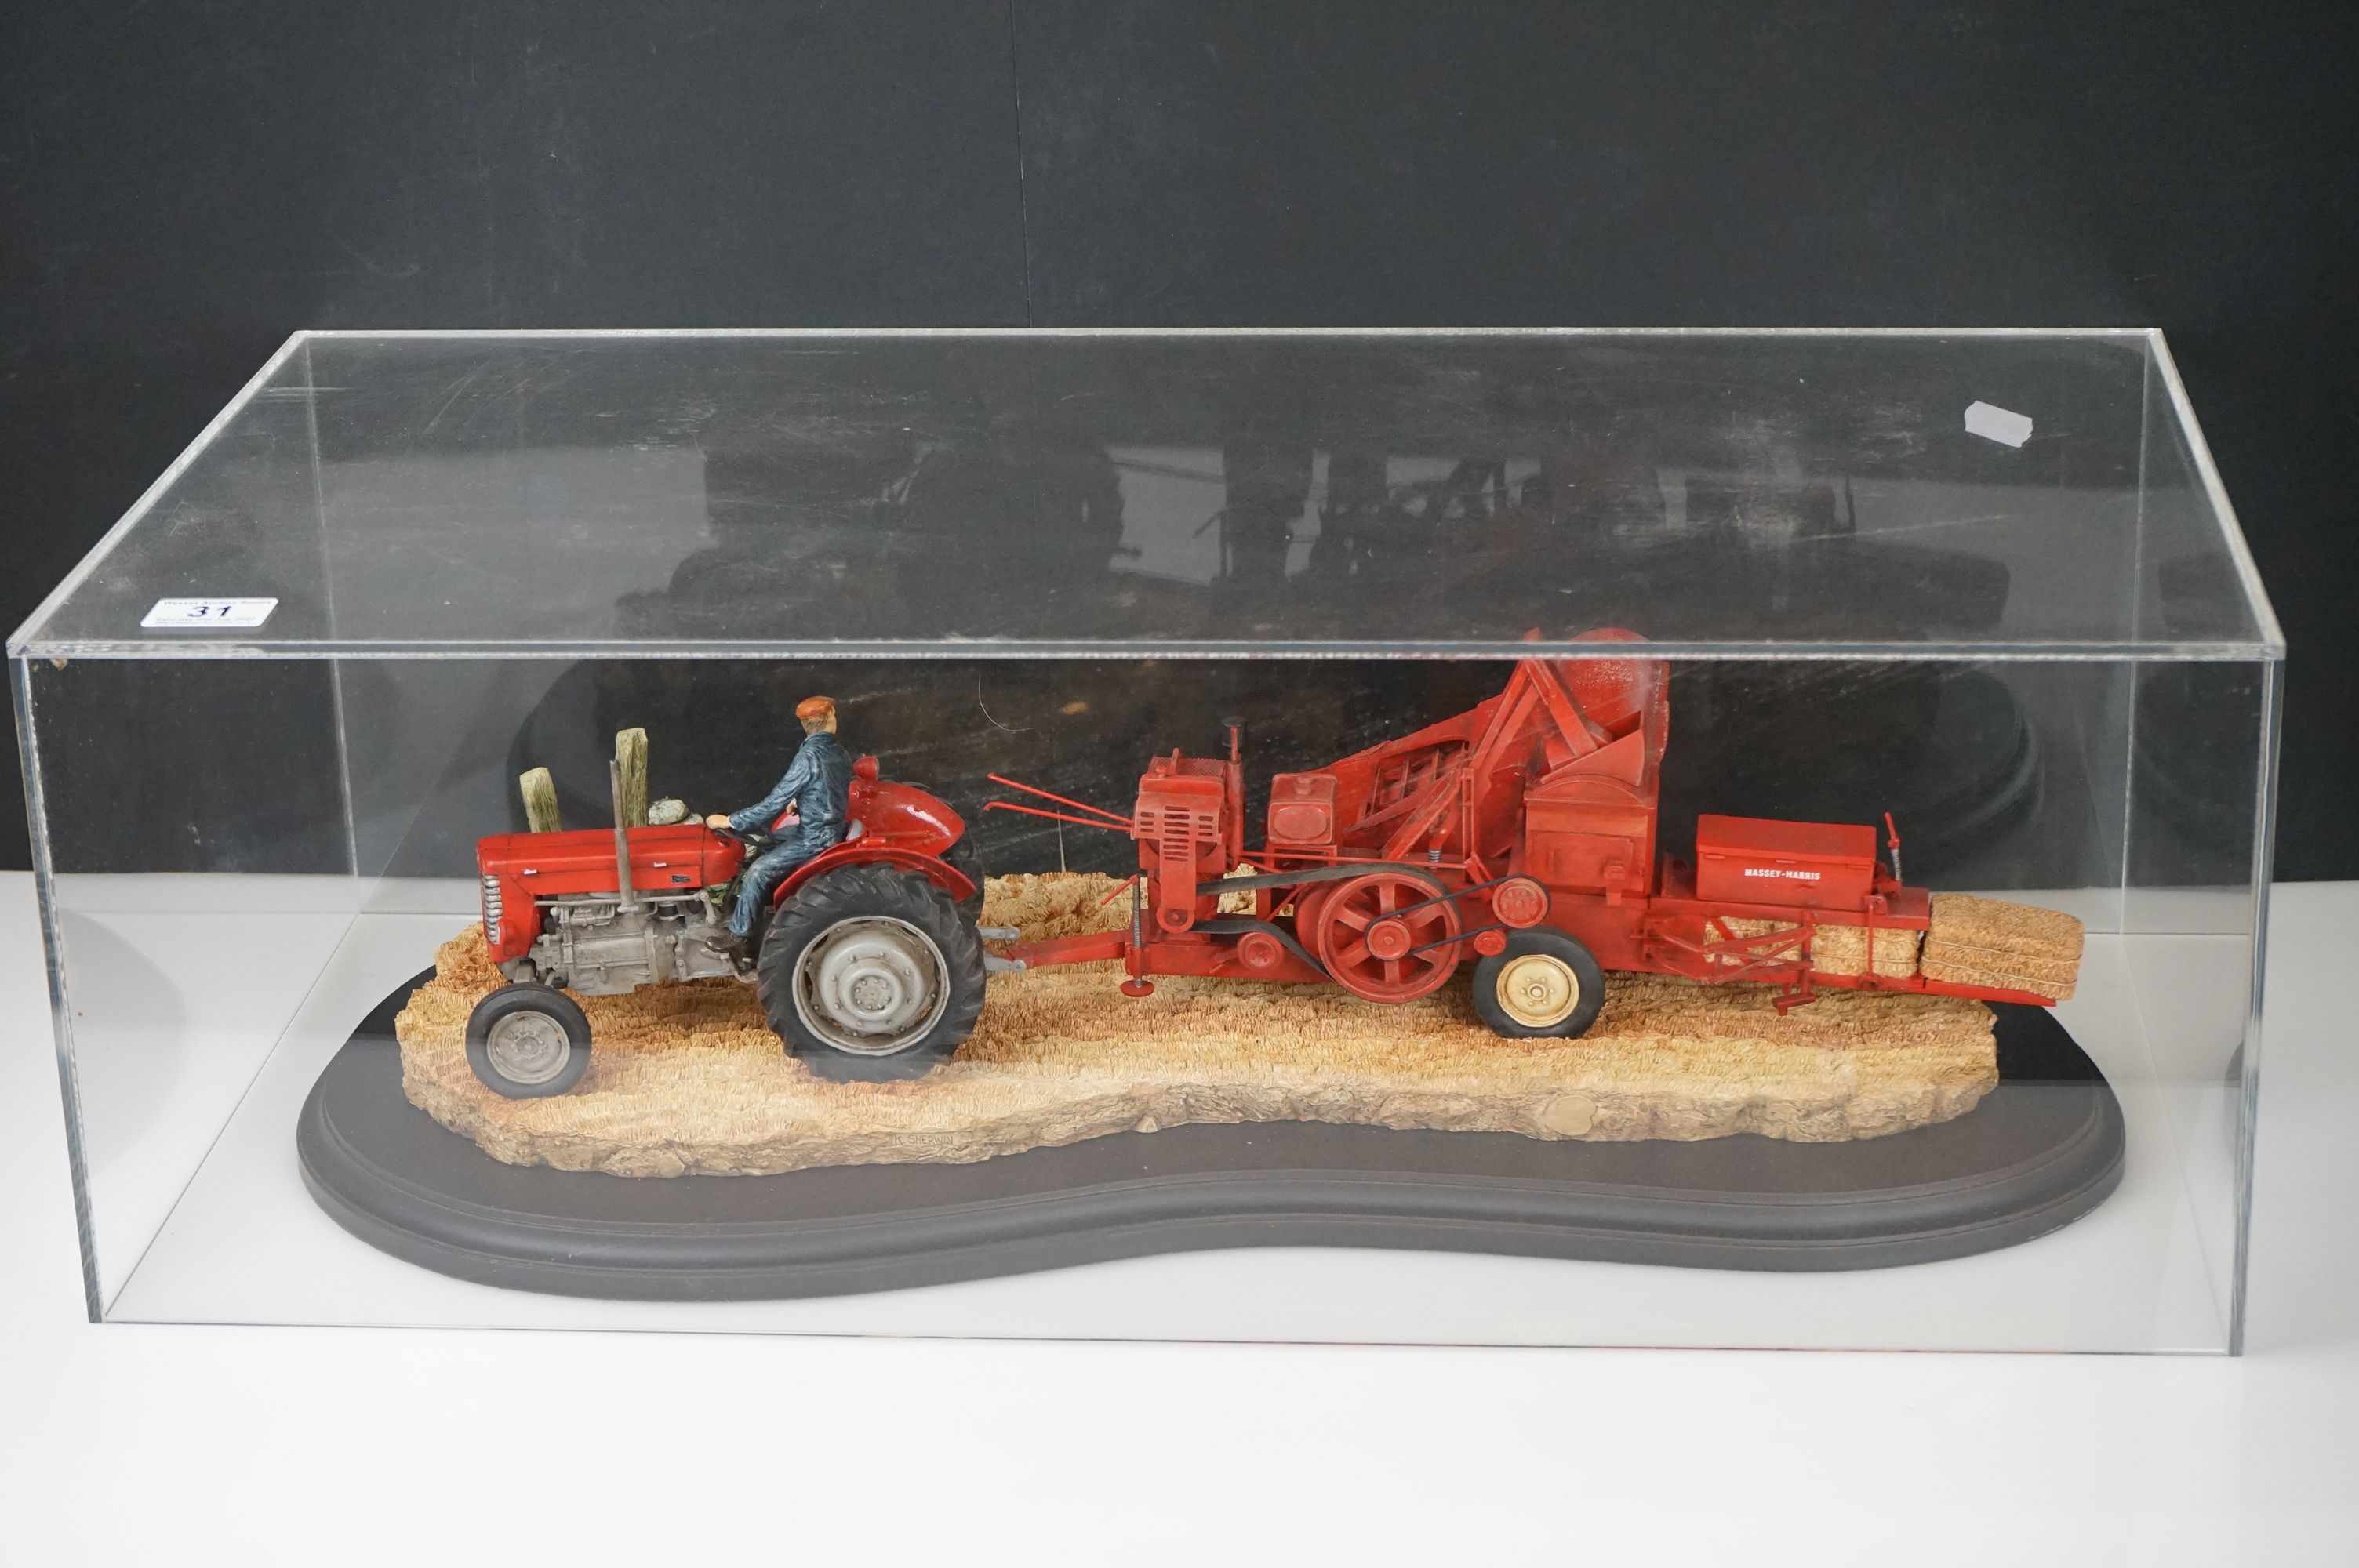 Country Artists Model of a Hay Baling titled ' Safely gathered in ' by Keith Sherwin on a wooden - Image 4 of 4